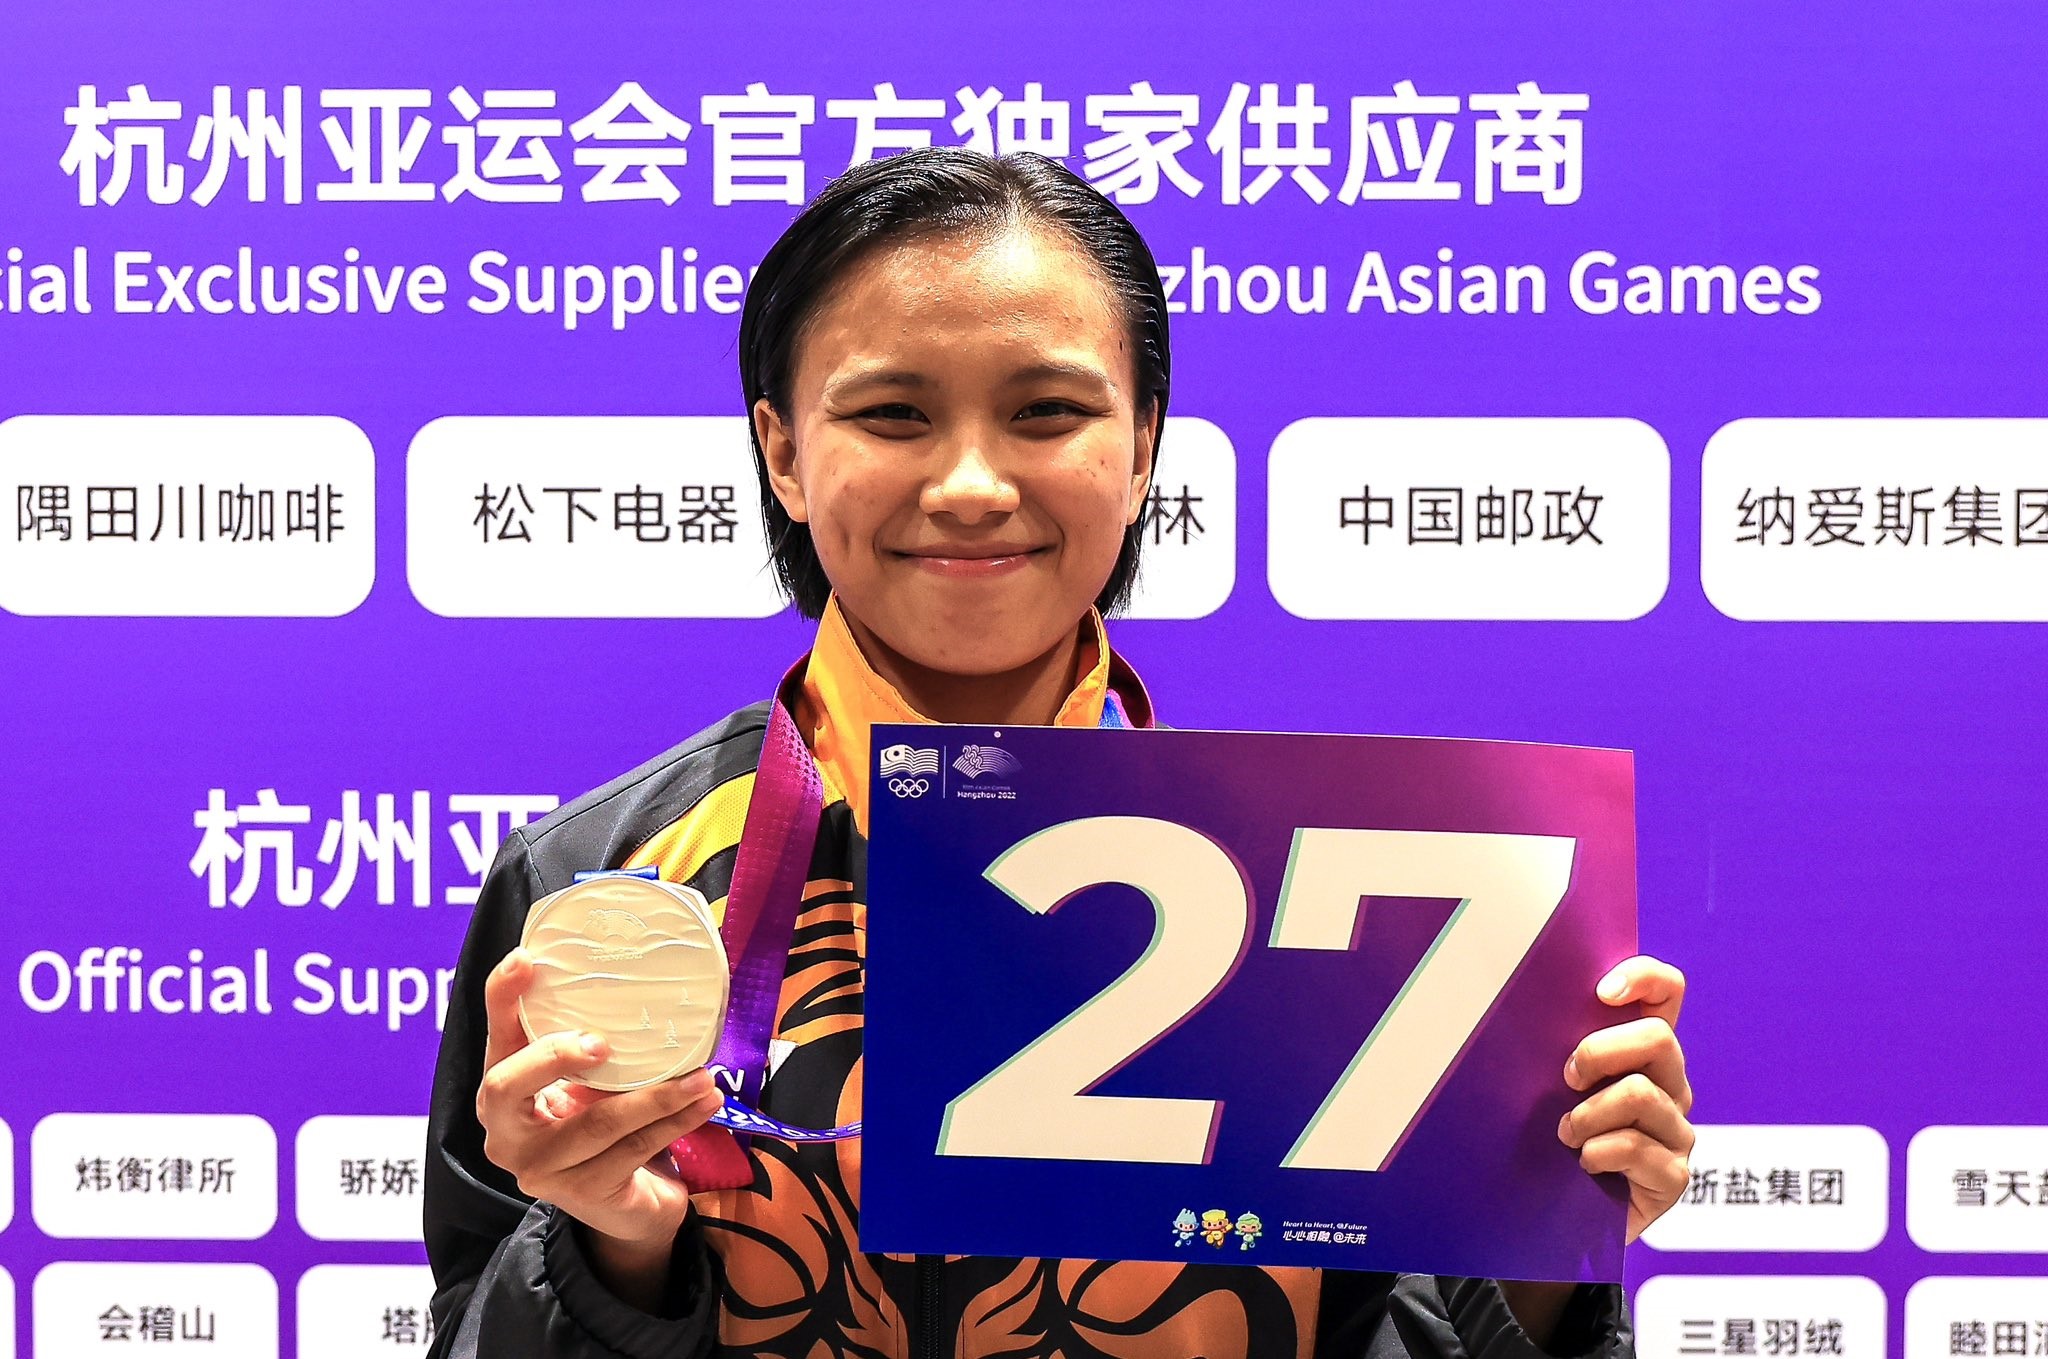 Asiad triumph: Malaysia exceeds target, aims for bonus medals